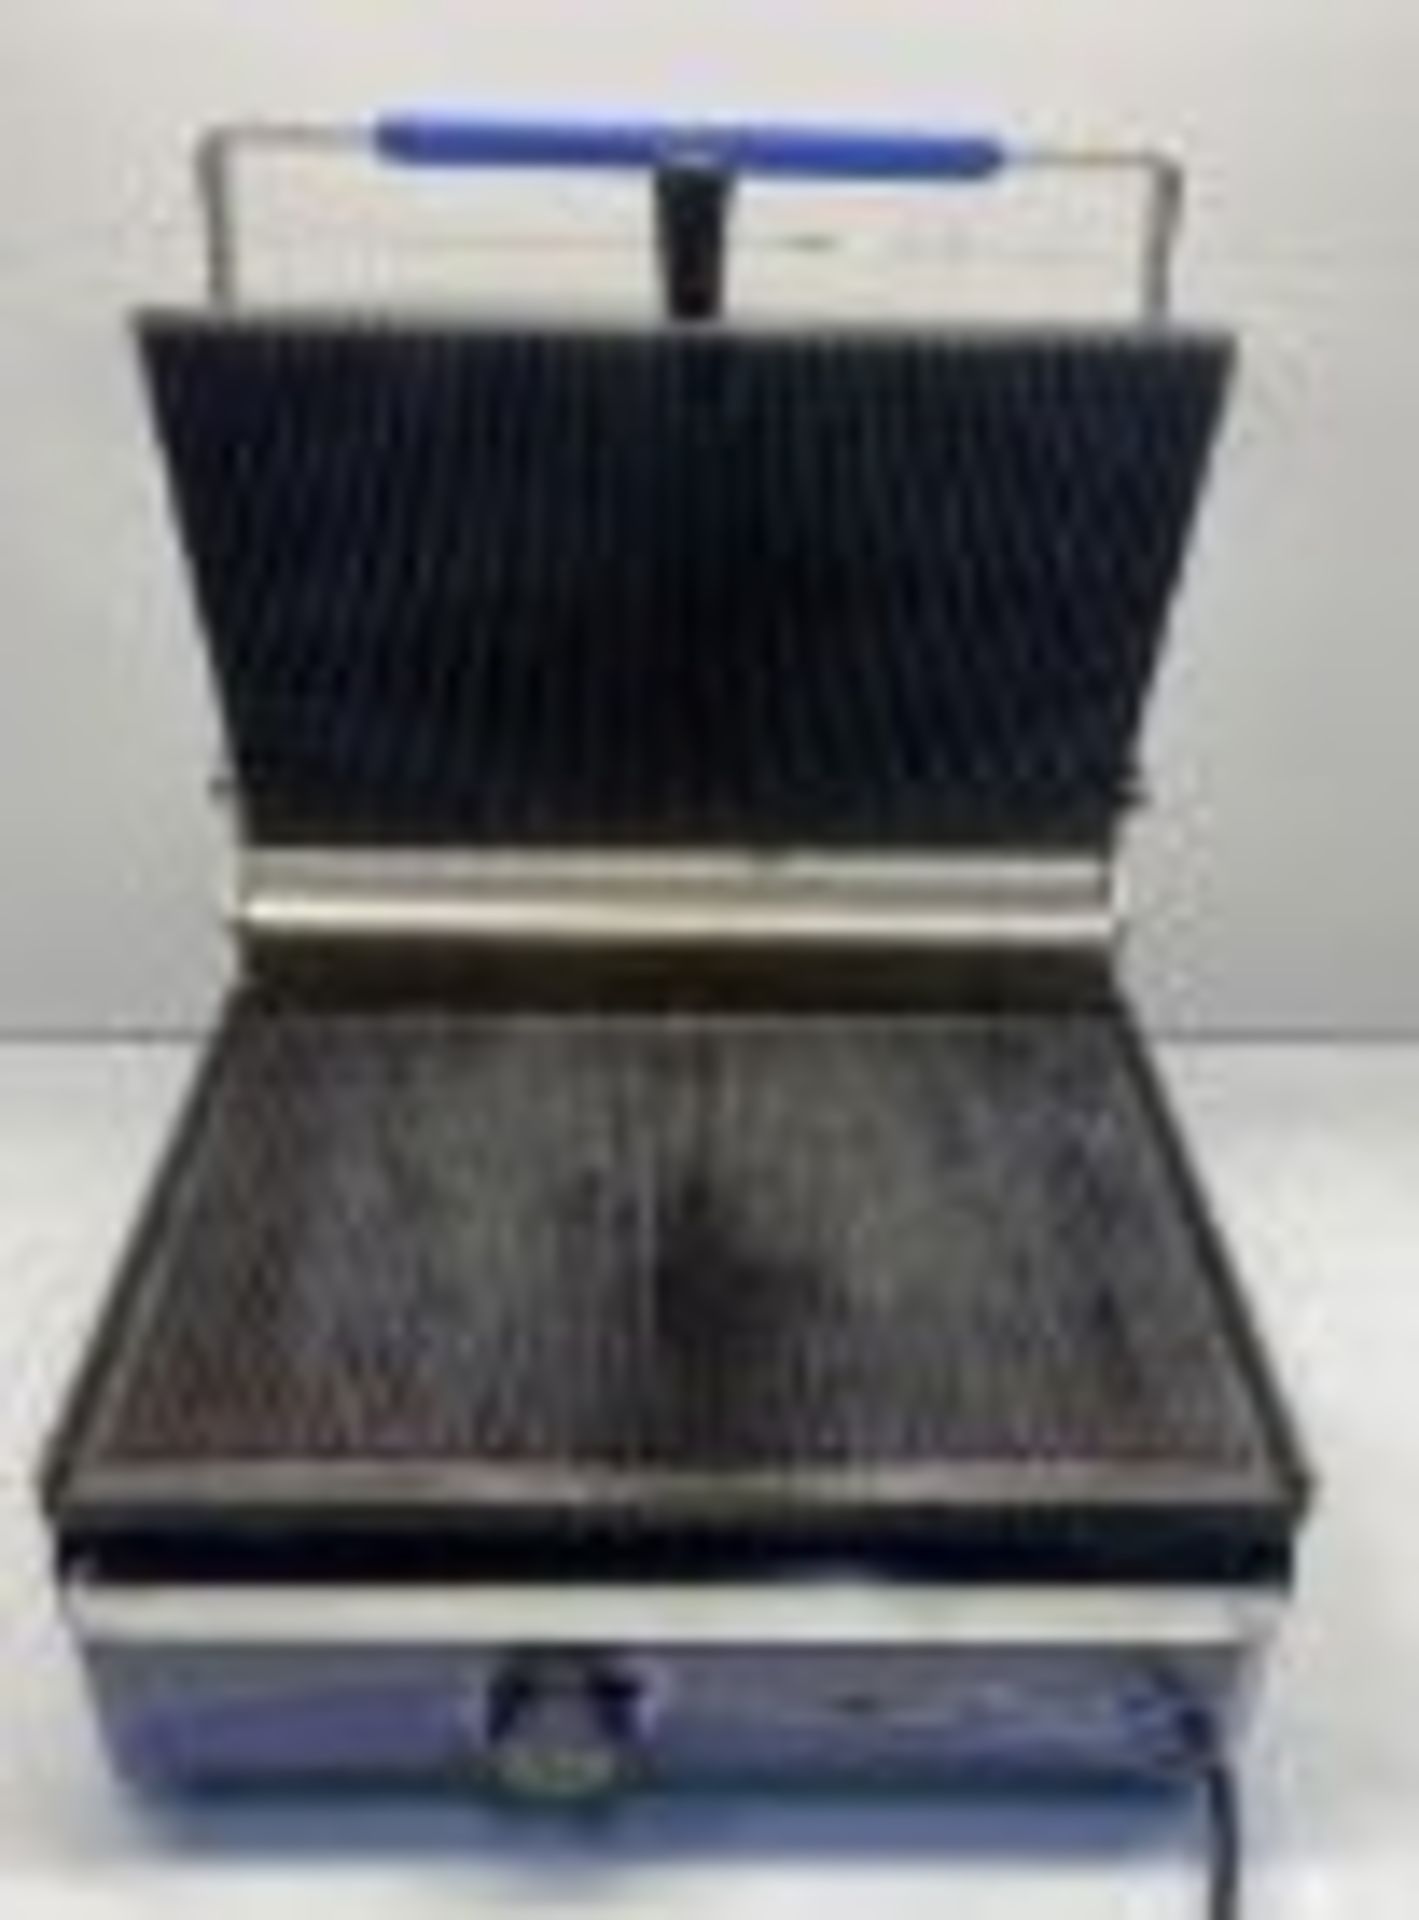 PiMAK | M070/A1 | Double Panini Contact grill - Image 2 of 6